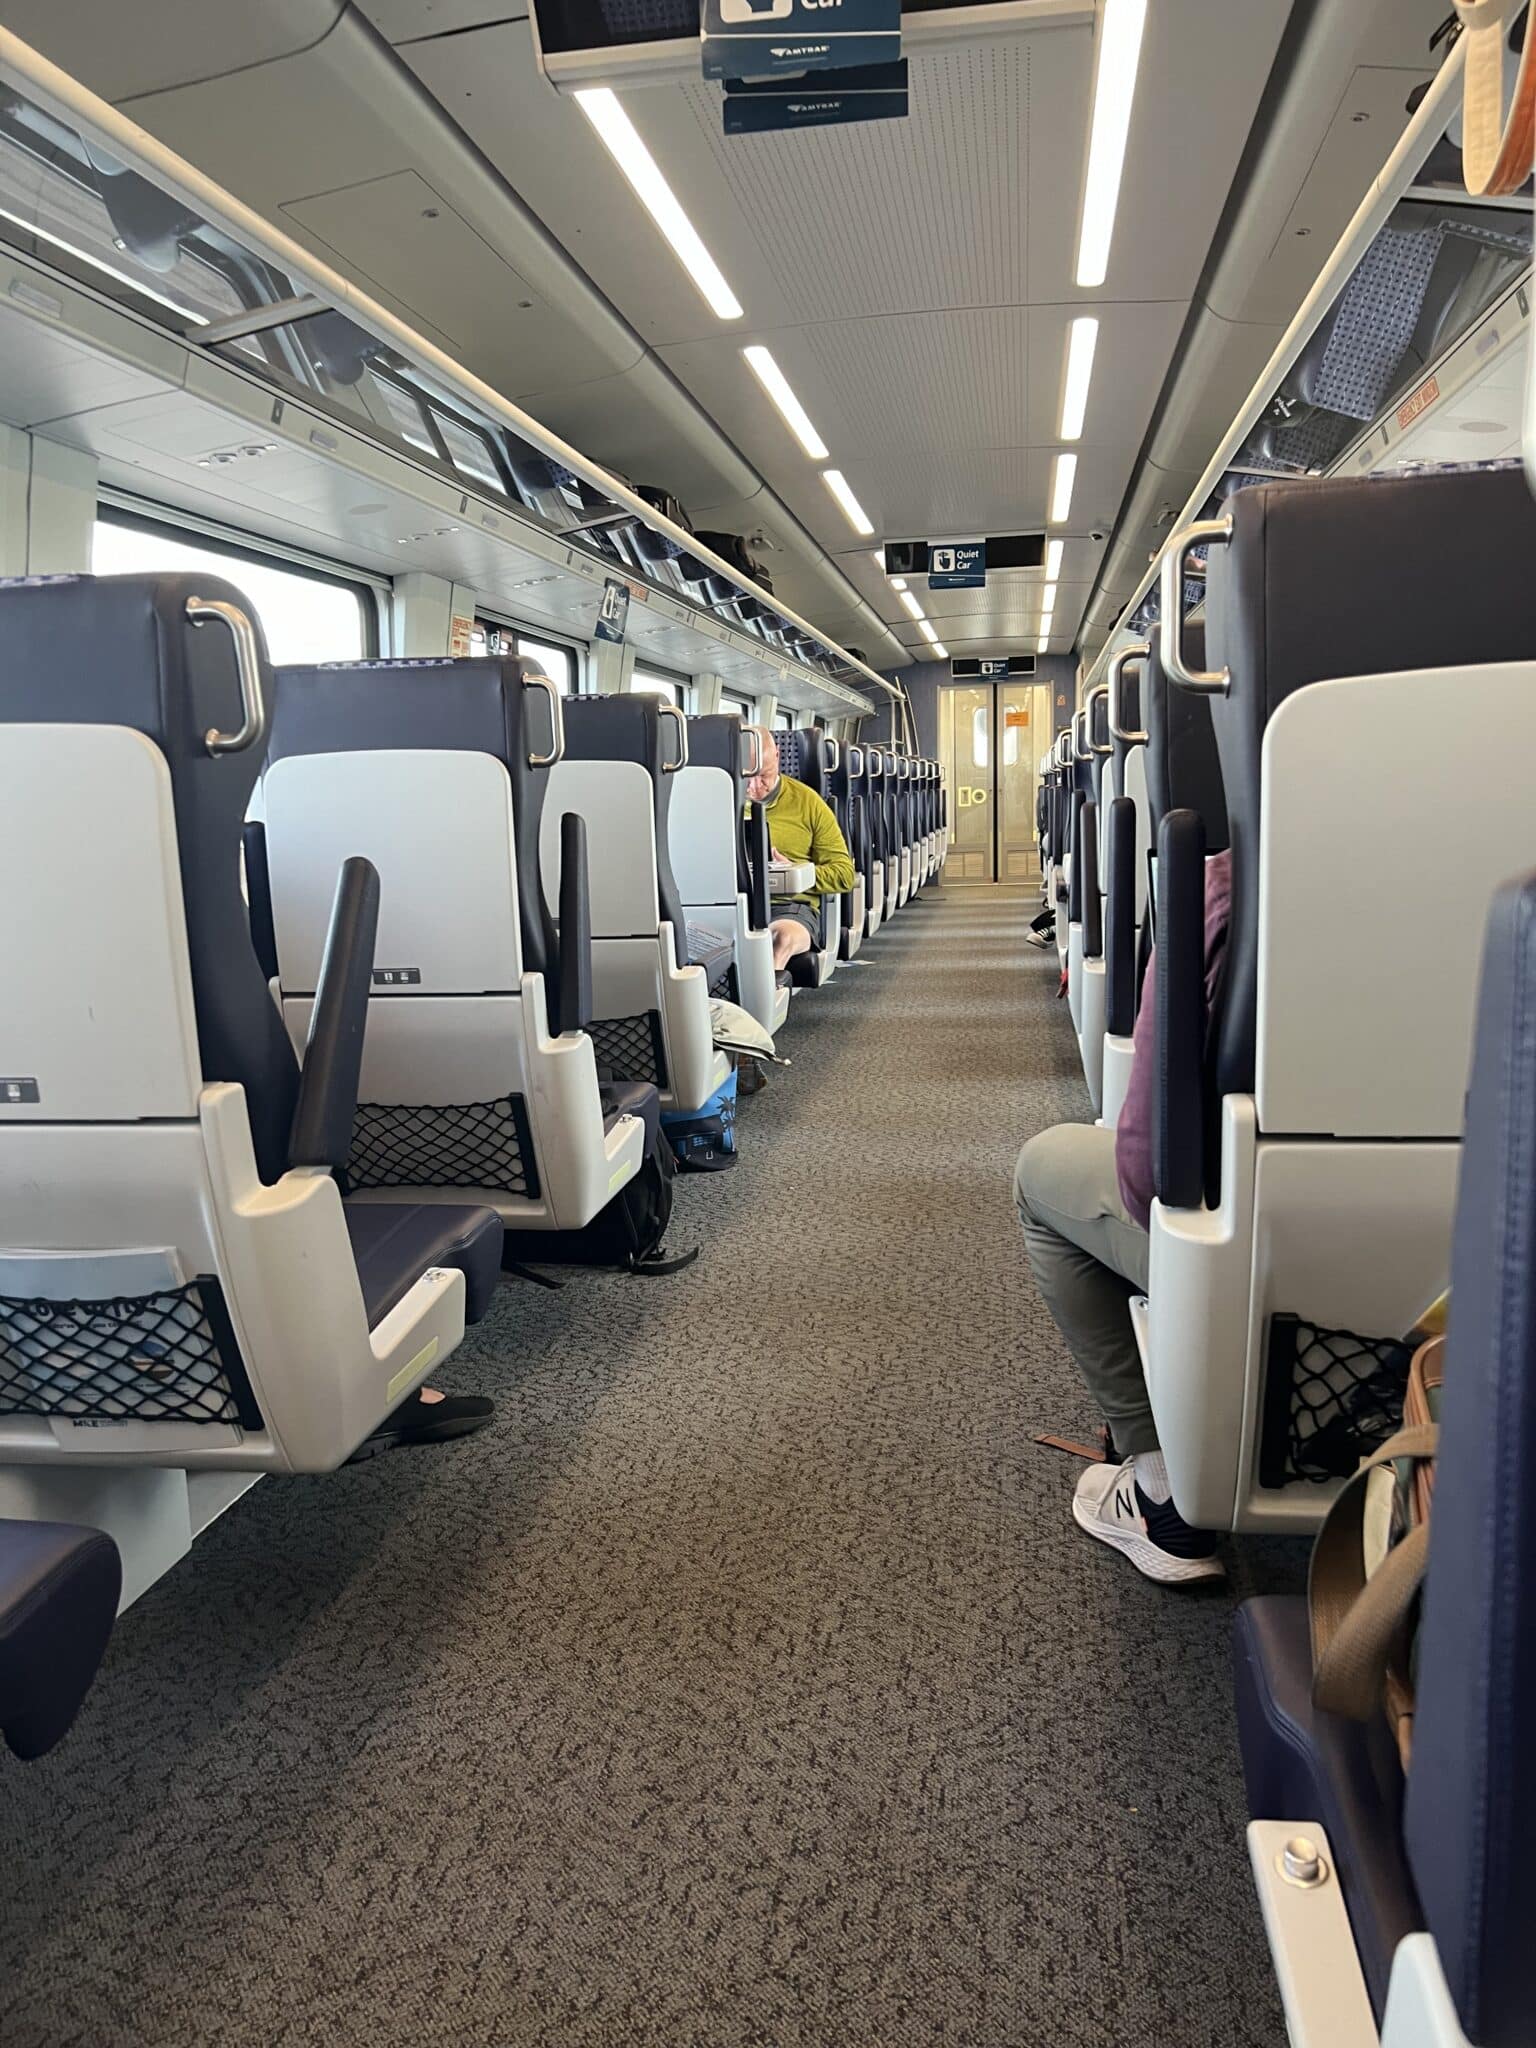 Seating in the new Amtrak Venture cars.